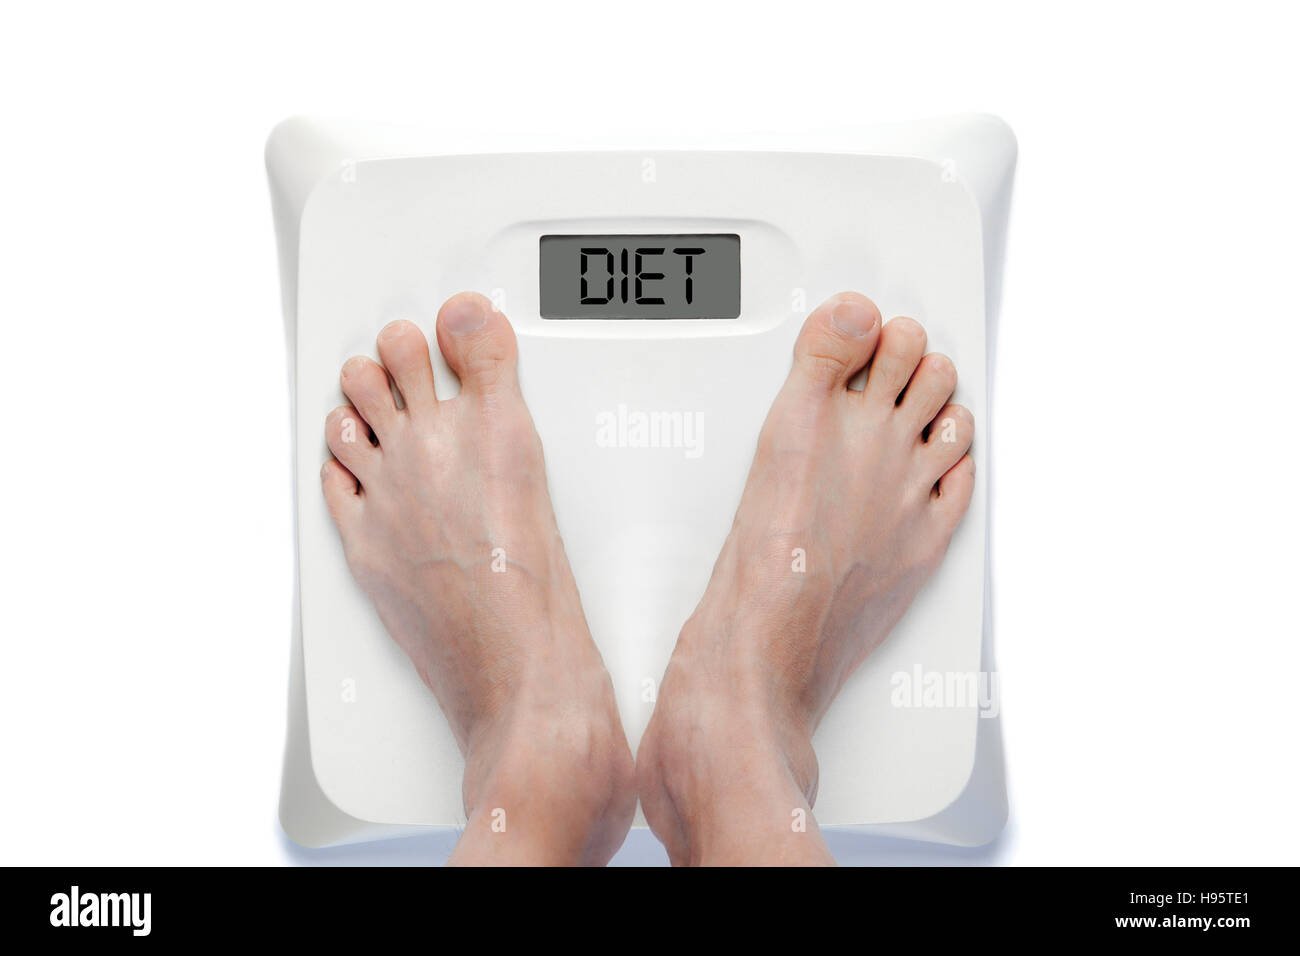 https://c8.alamy.com/comp/H95TE1/feet-on-bathroom-scale-with-the-word-diet-on-screen-signifies-either-H95TE1.jpg